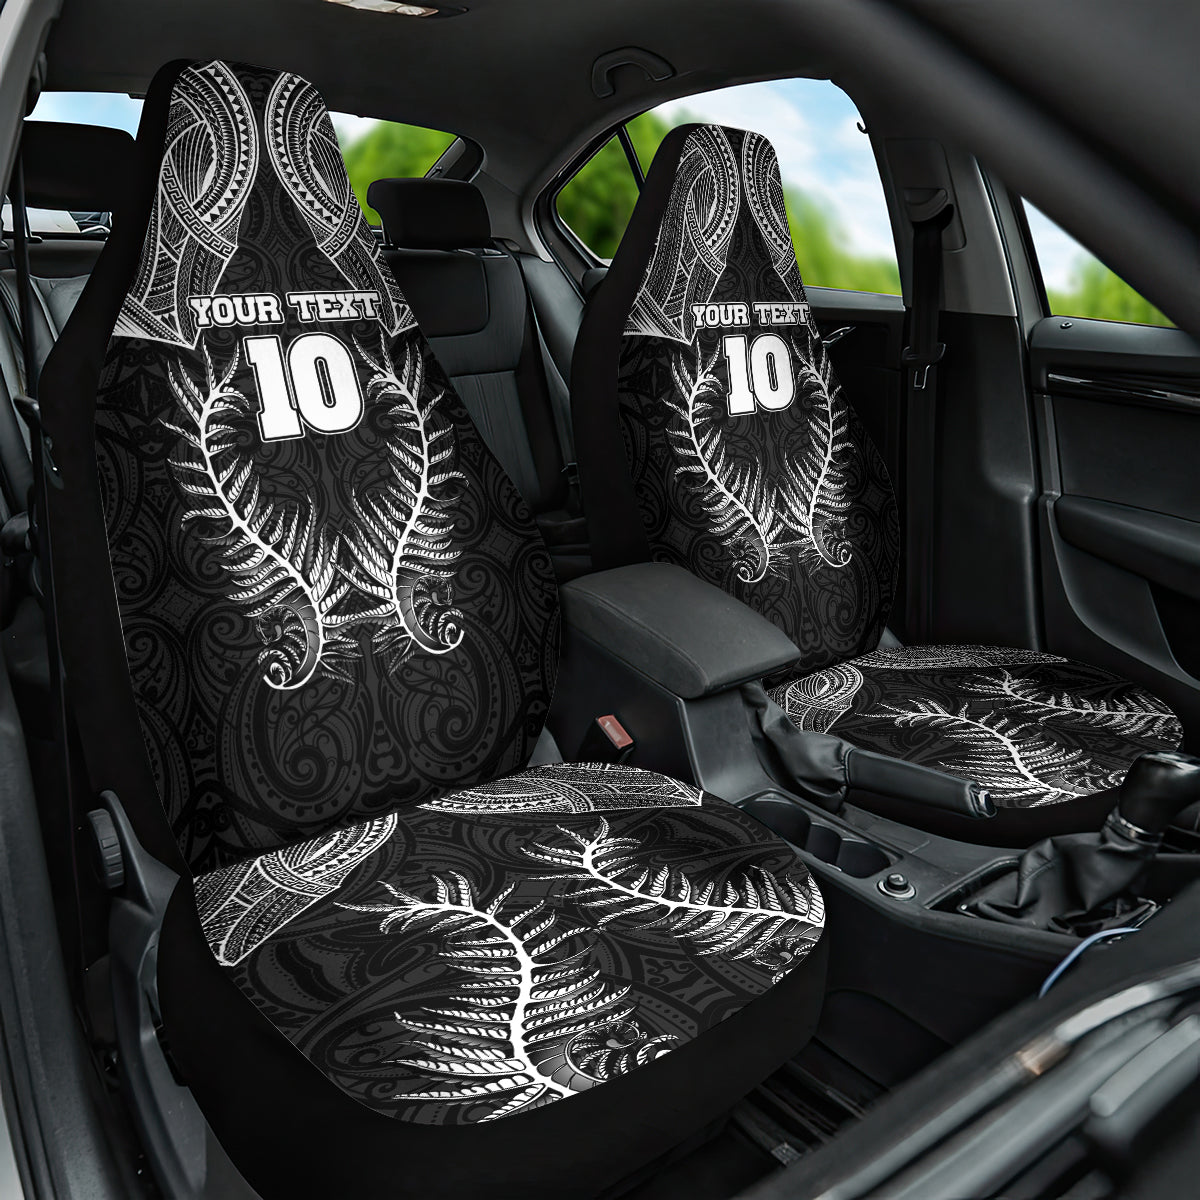 Custom New Zealand Rugby Car Seat Cover Aotearoa Champion Cup History with Silver Fern LT03 One Size Black - Polynesian Pride